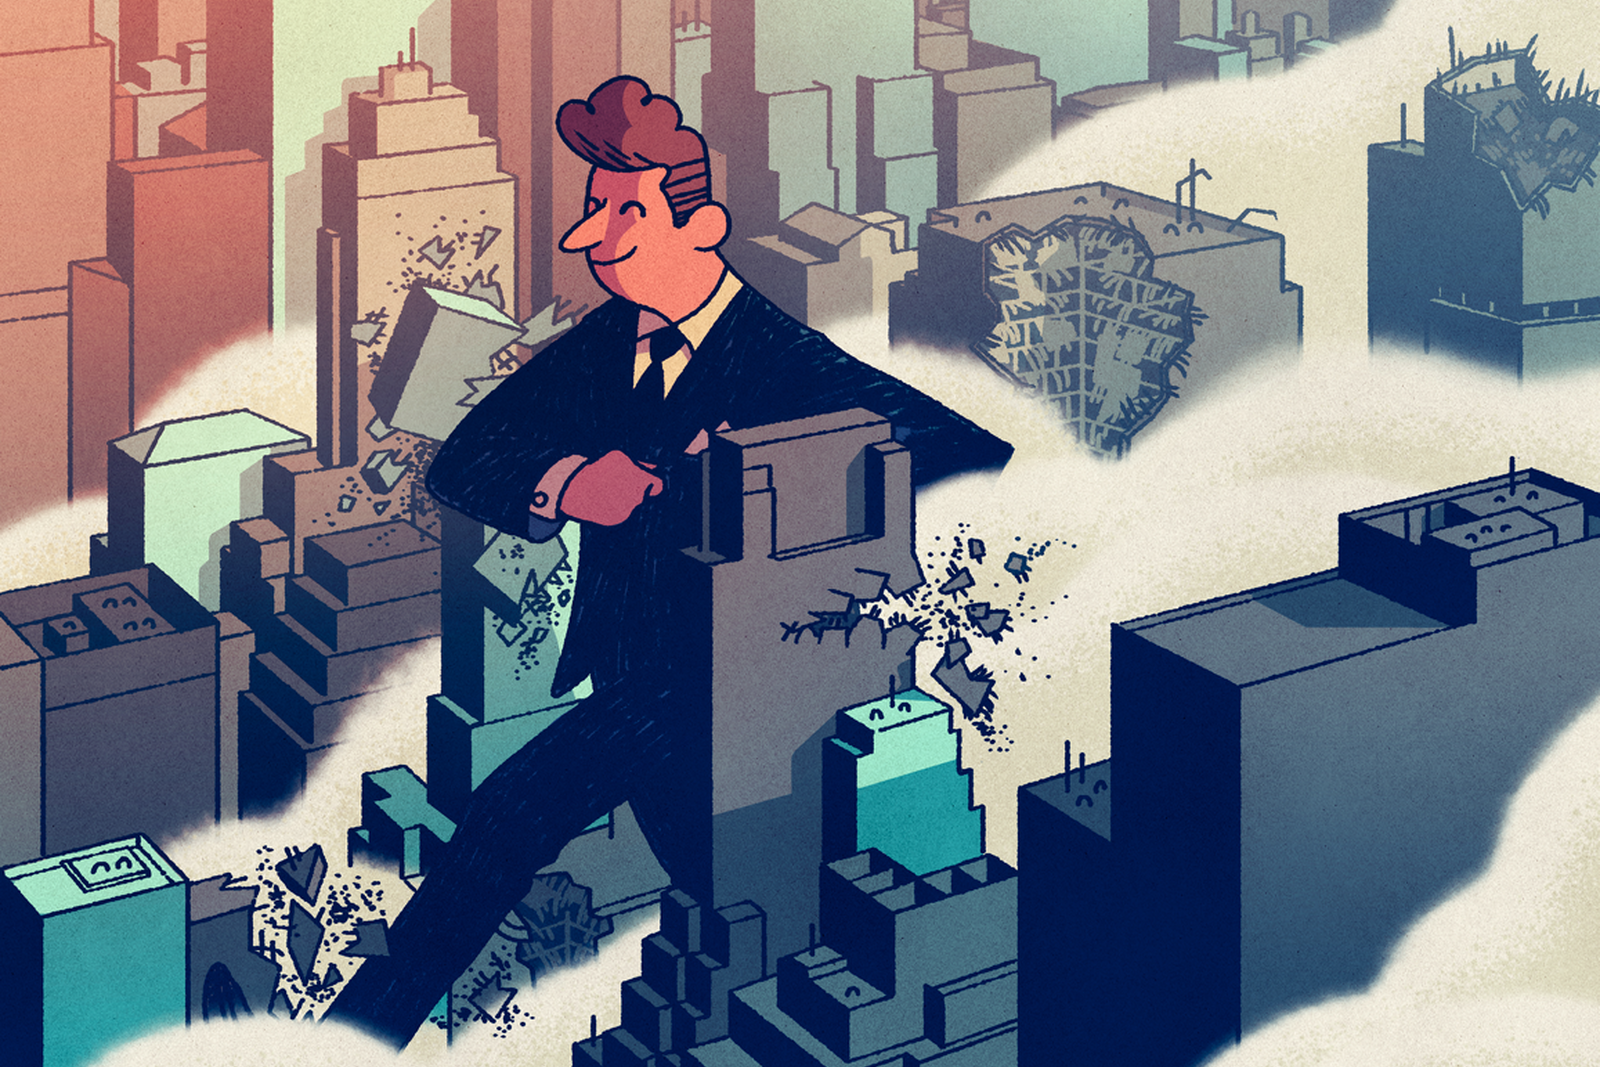 A businessman with unethical amnesia stomps through a city.